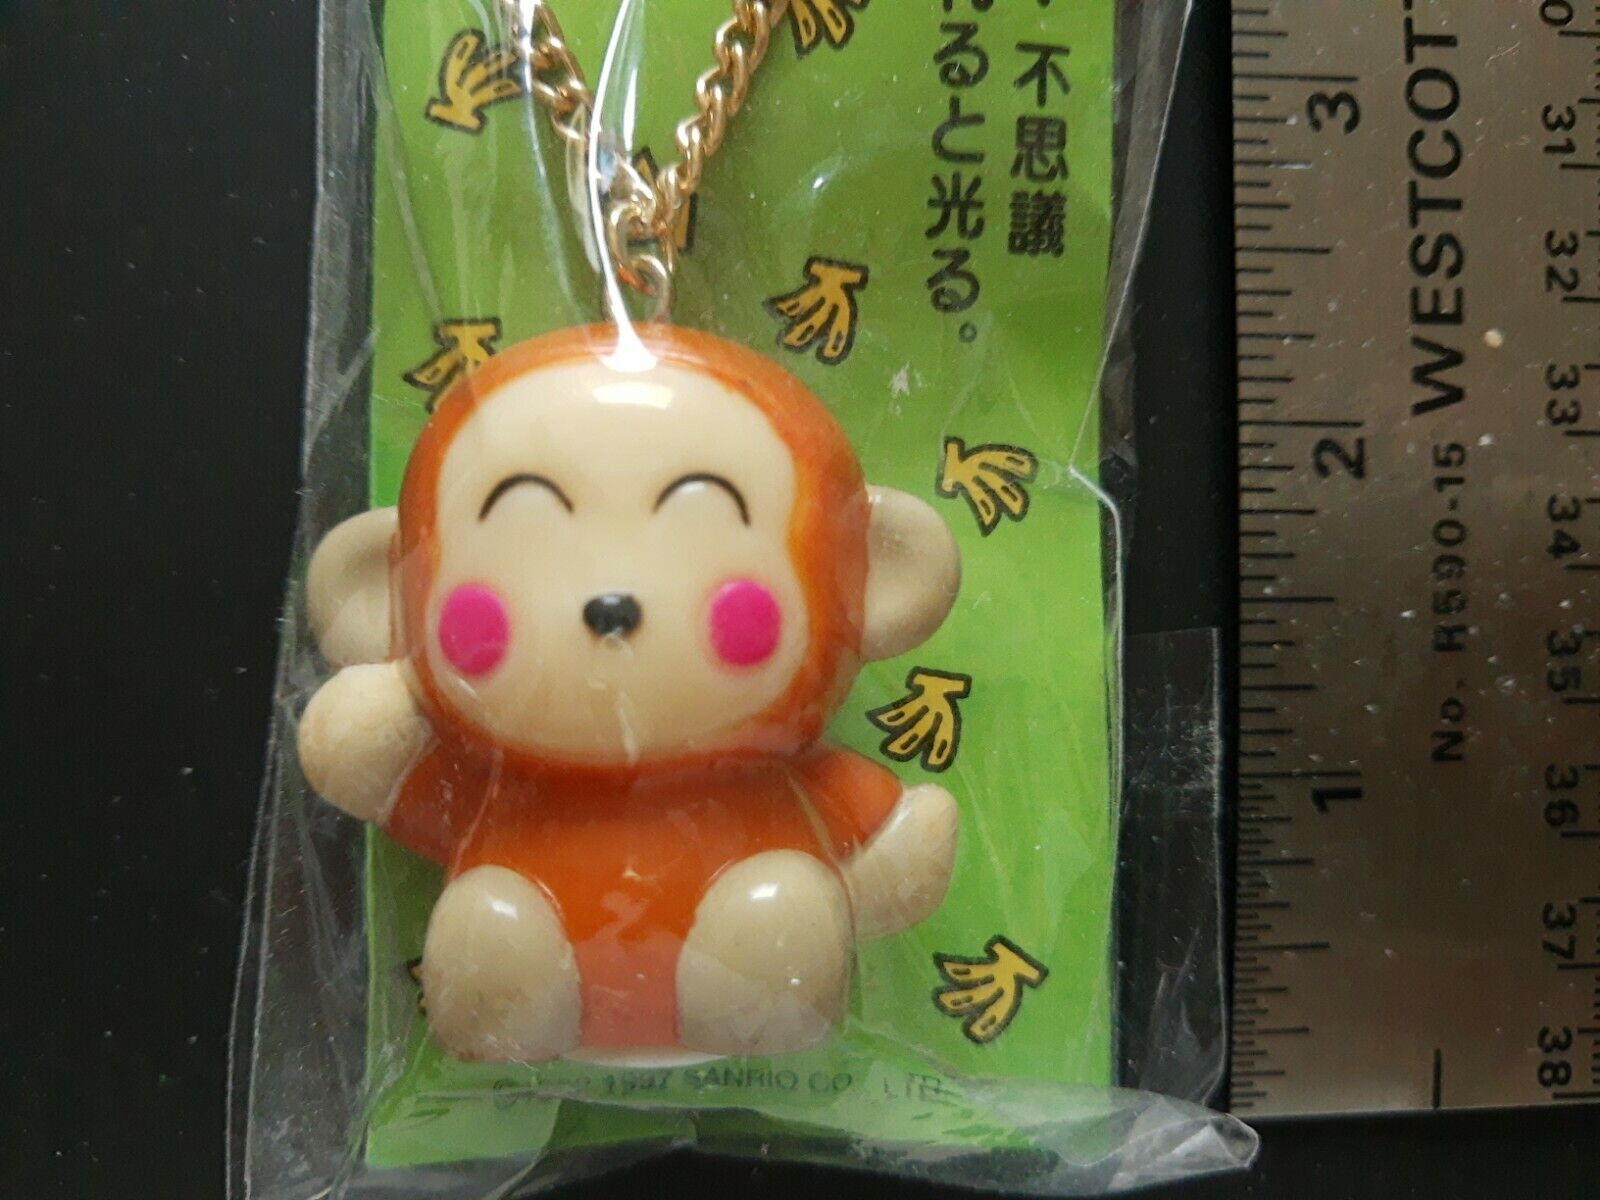 1997 Sanrio Monkichi Light Up Figure for cell phone?